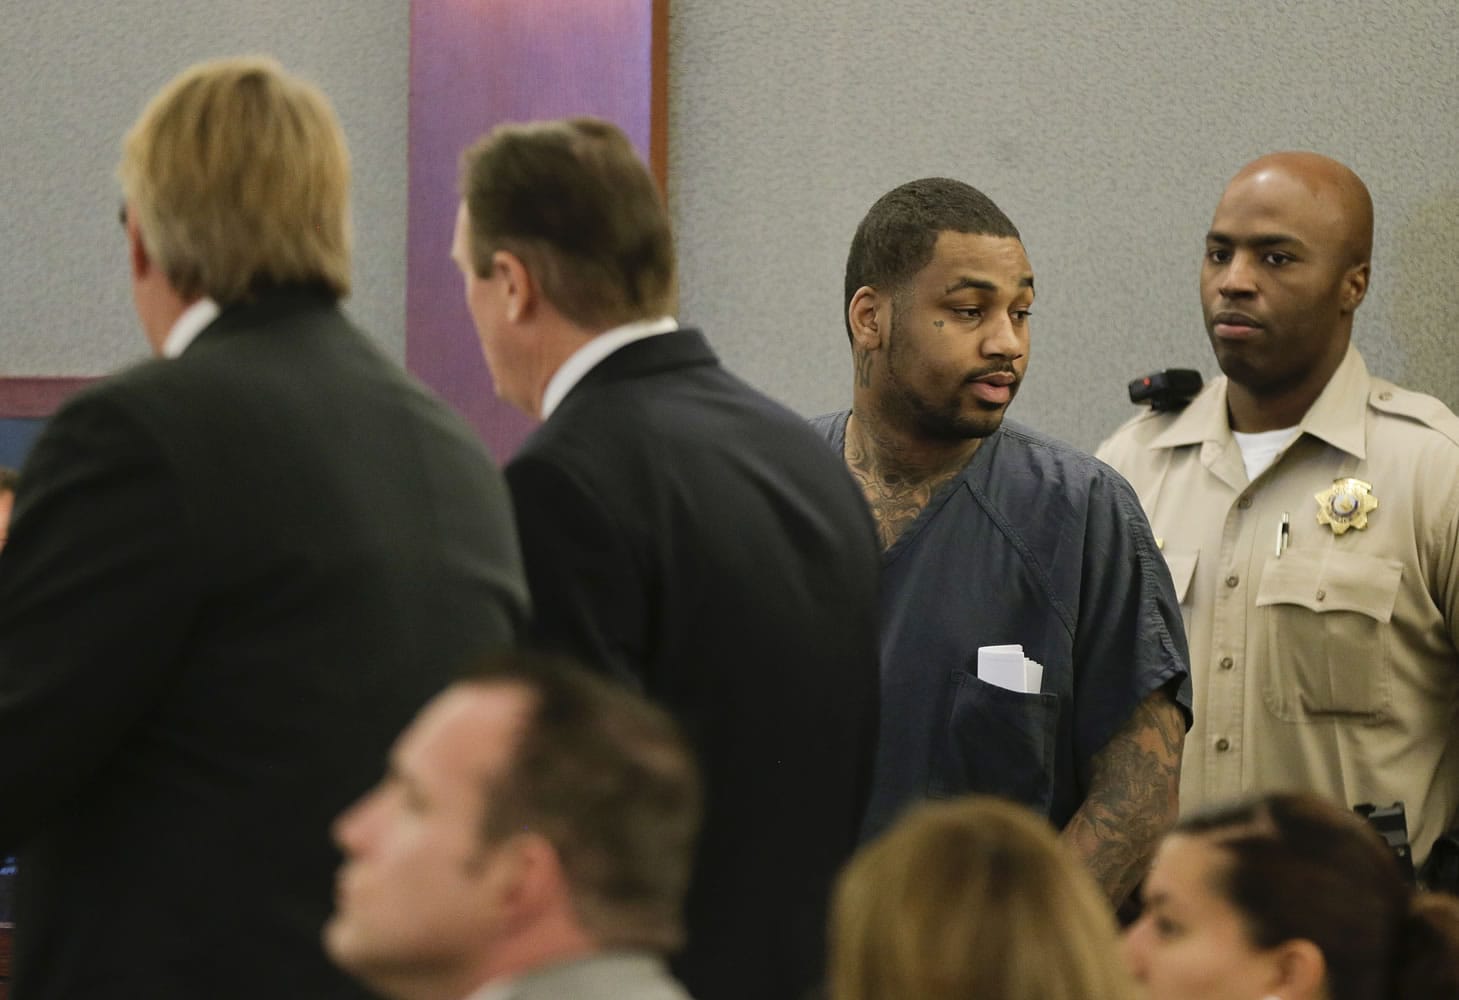 Ammar Harris stands next to public defenders Randall Pike, left, and David Schieck during his arraignment in district court Wednesday in Las Vegas. Harris is accused of firing fatal shots early Feb.